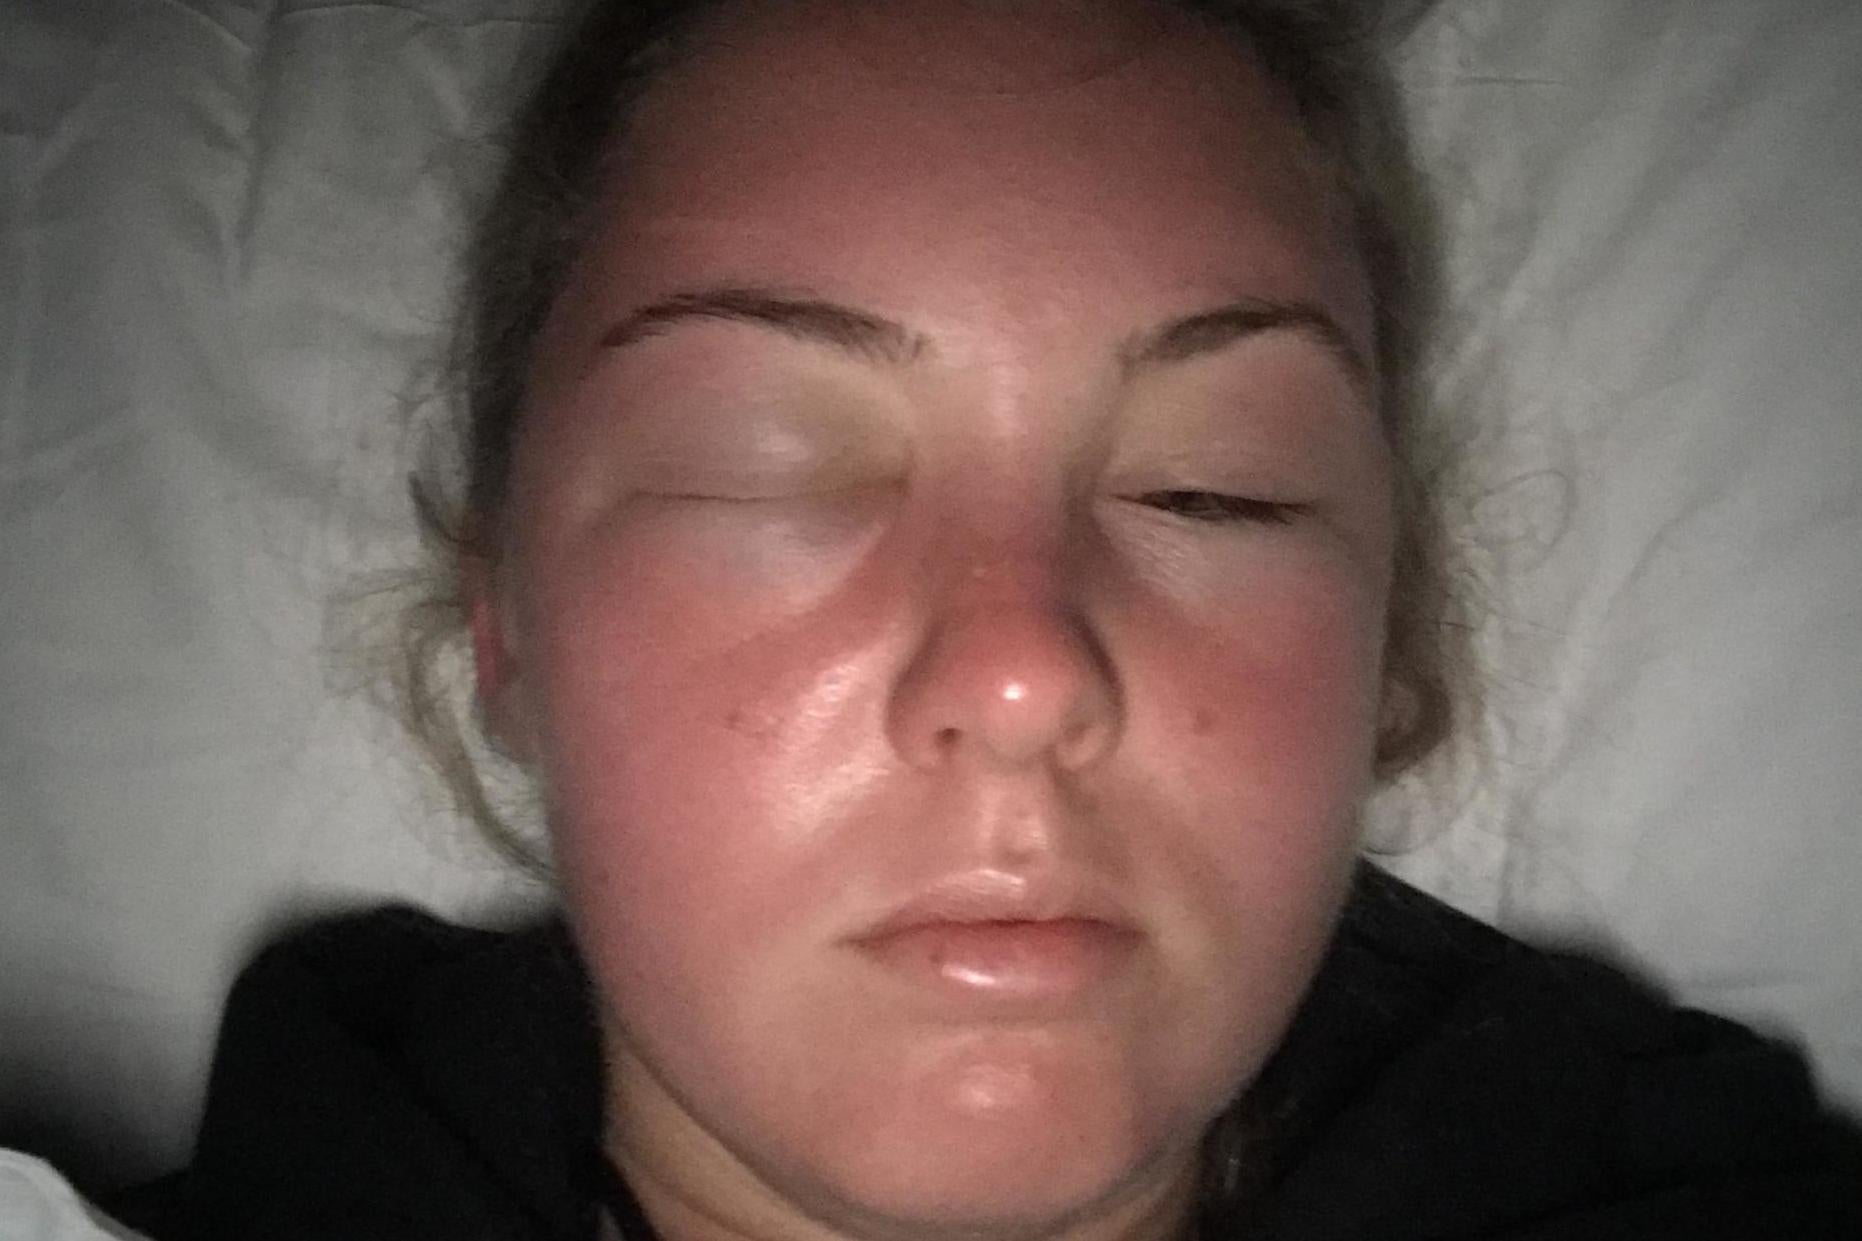 Holly Barrington's face swelled uncontrollably overnight after a day in the sun in Tenerife